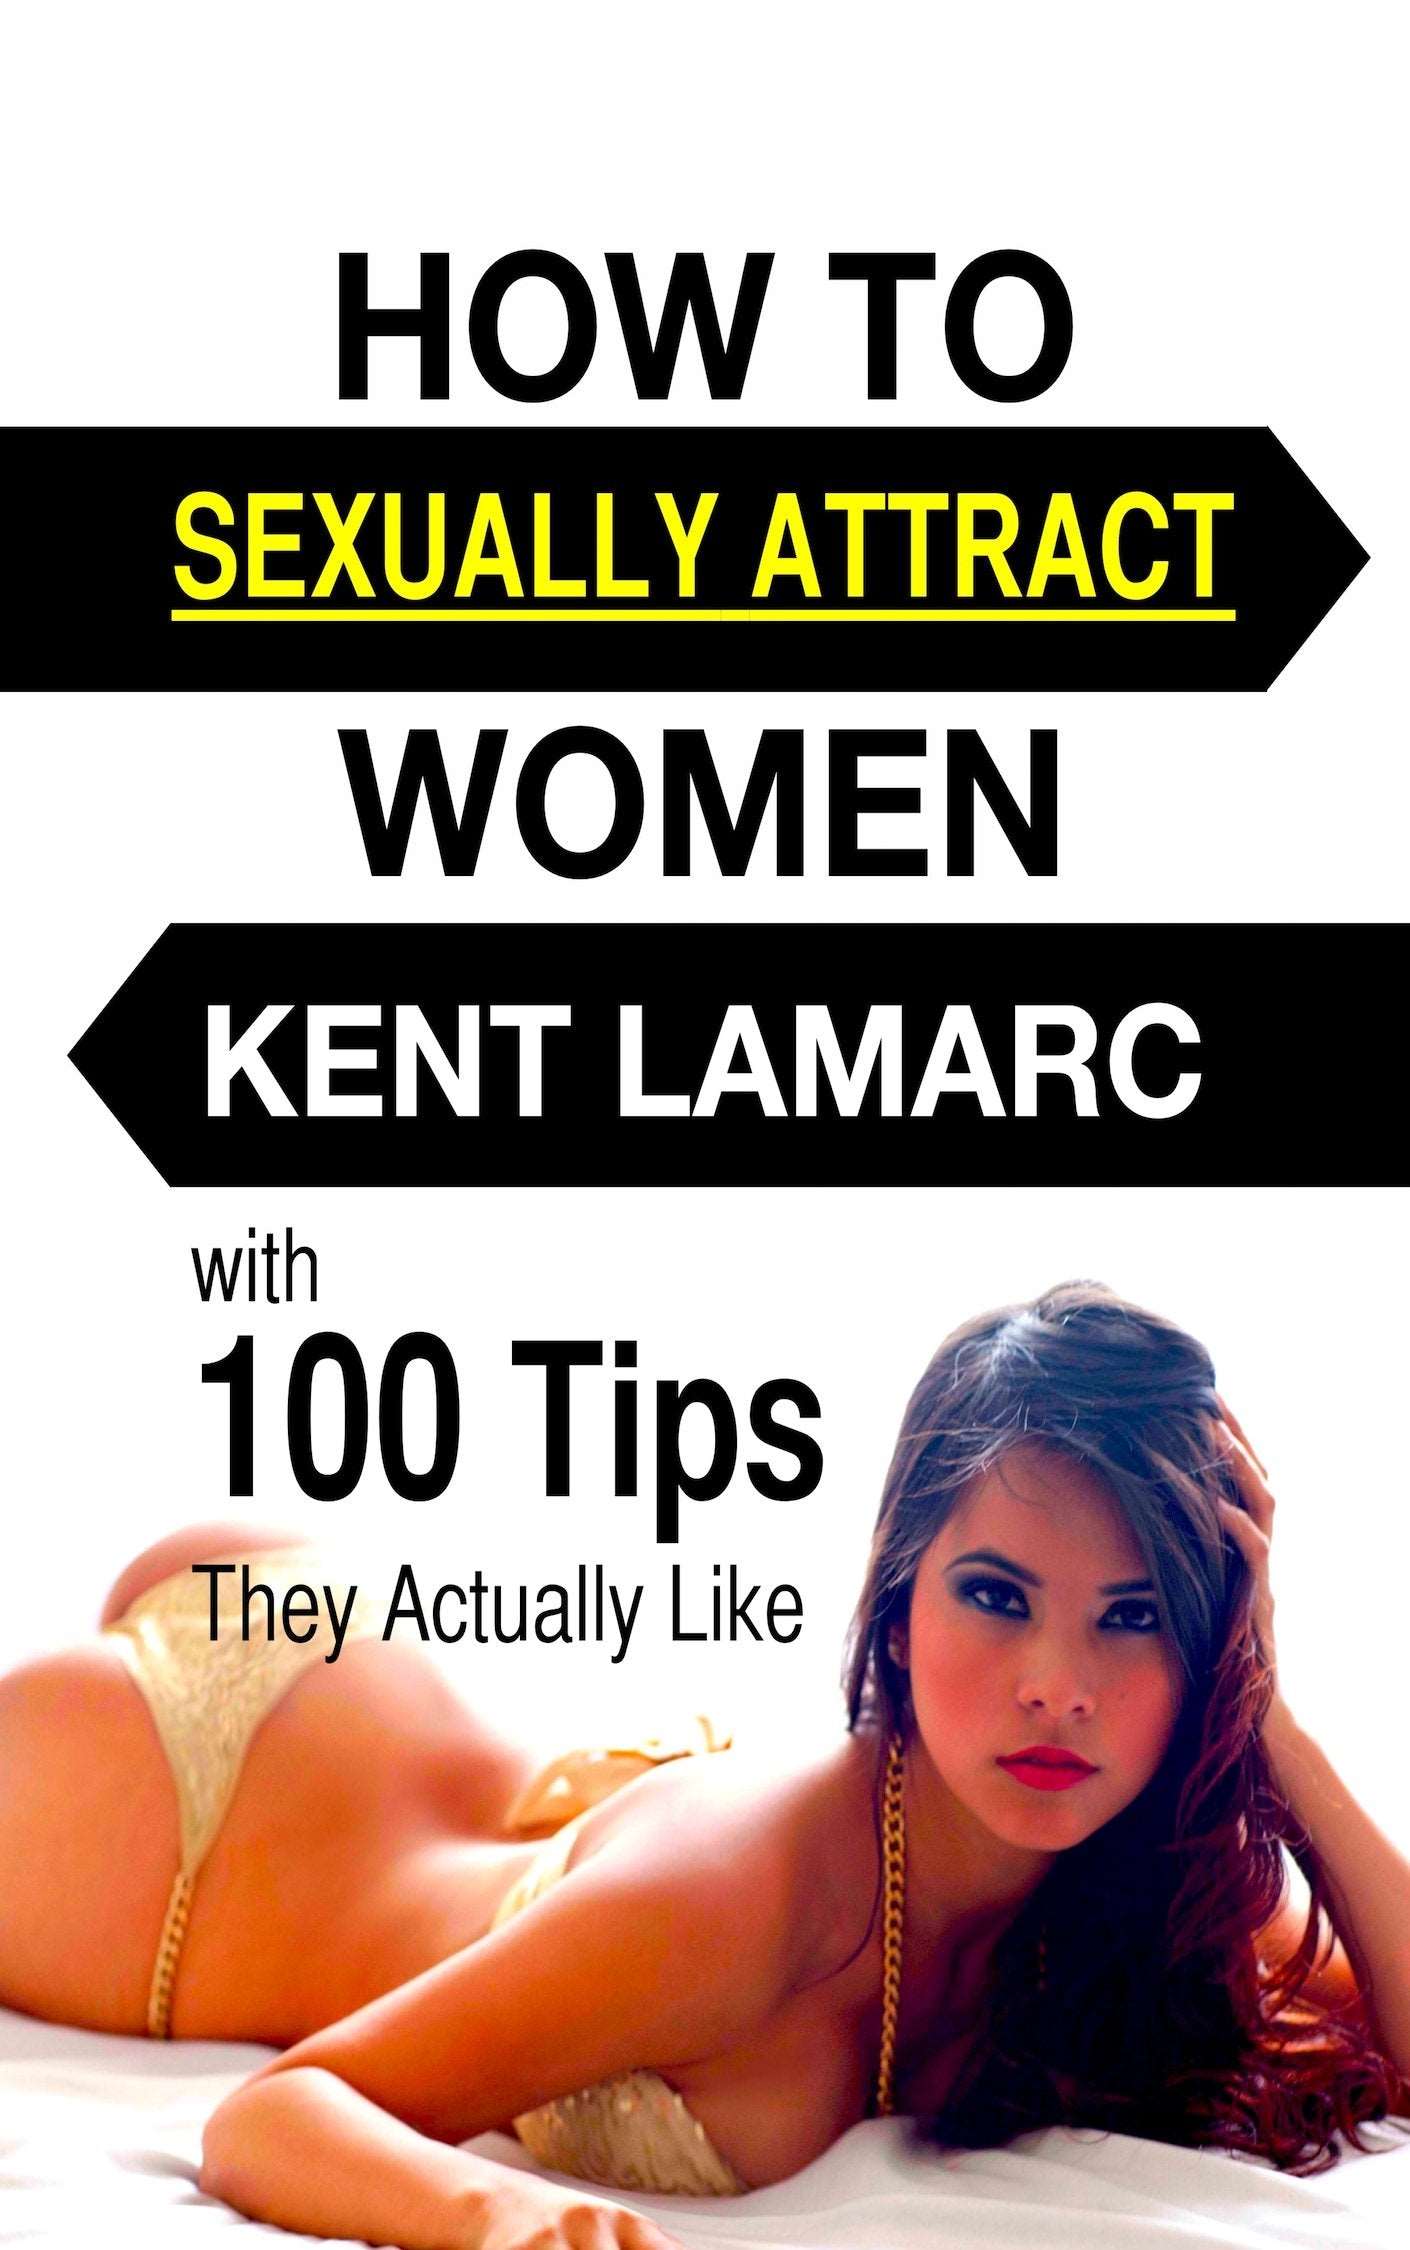 How to Sexually Attract Women